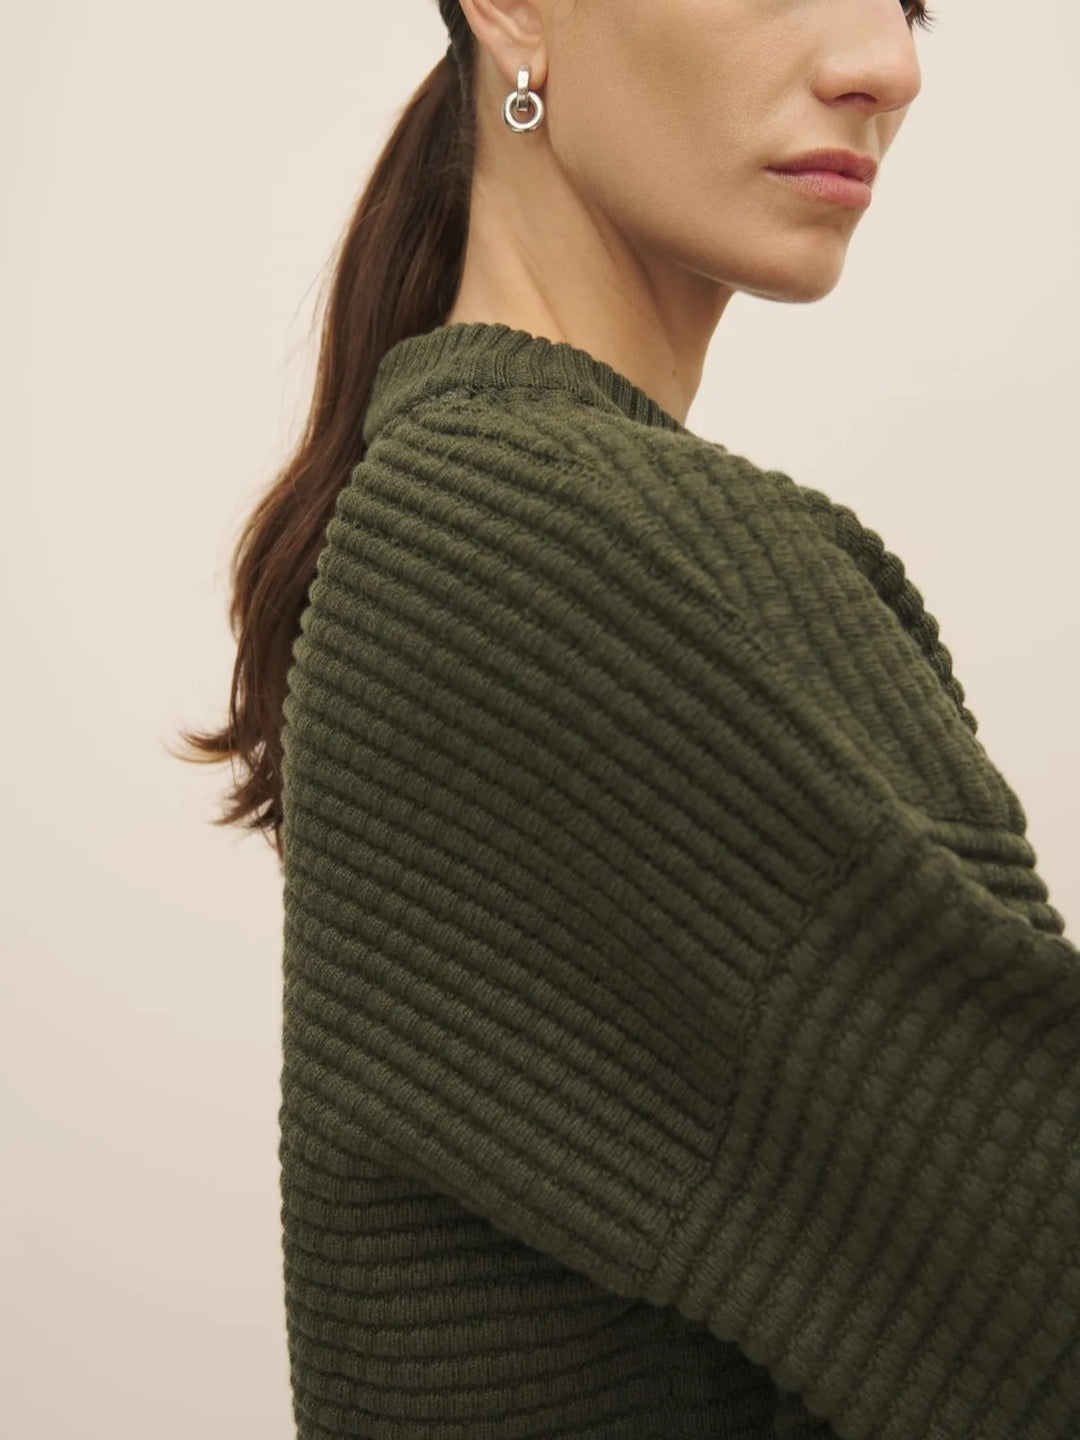 Profile view of a woman wearing a Kowtow Bubble Jumper – Khaki Marle, made from fairtrade organic cotton, and an earring with a neutral background.